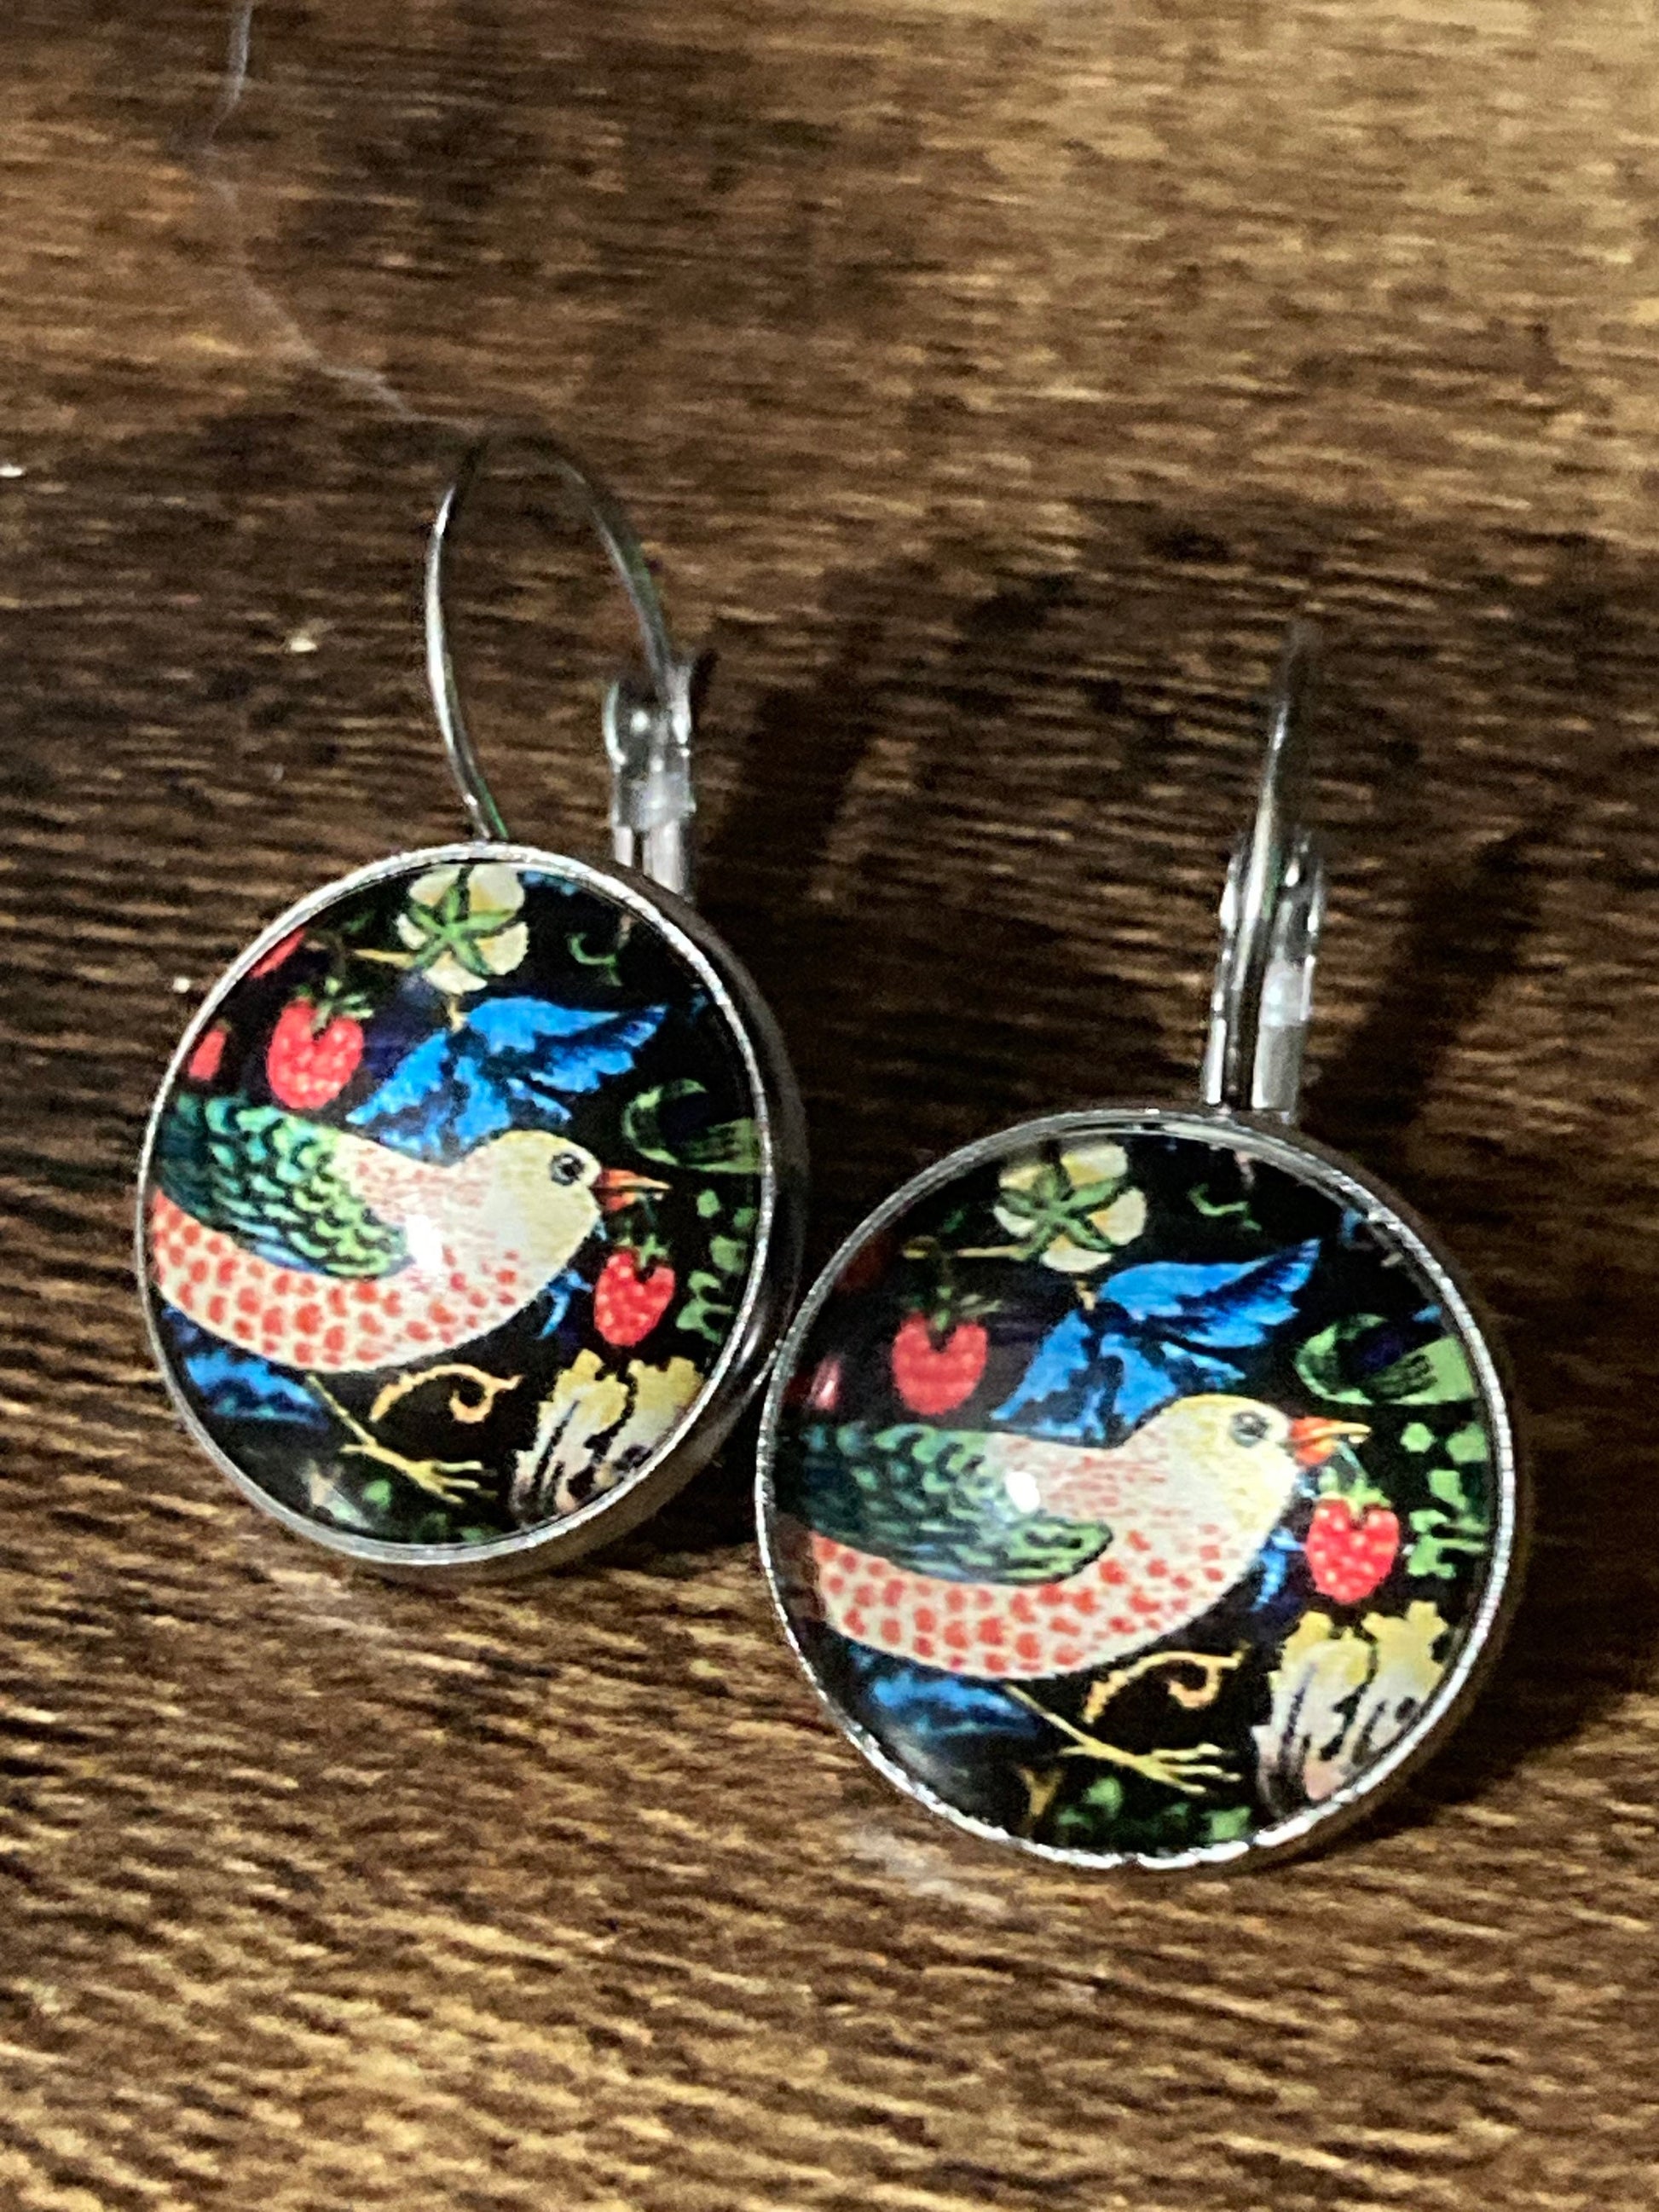 William Morris earrings strawberry thief print 18mm round glass cabochon